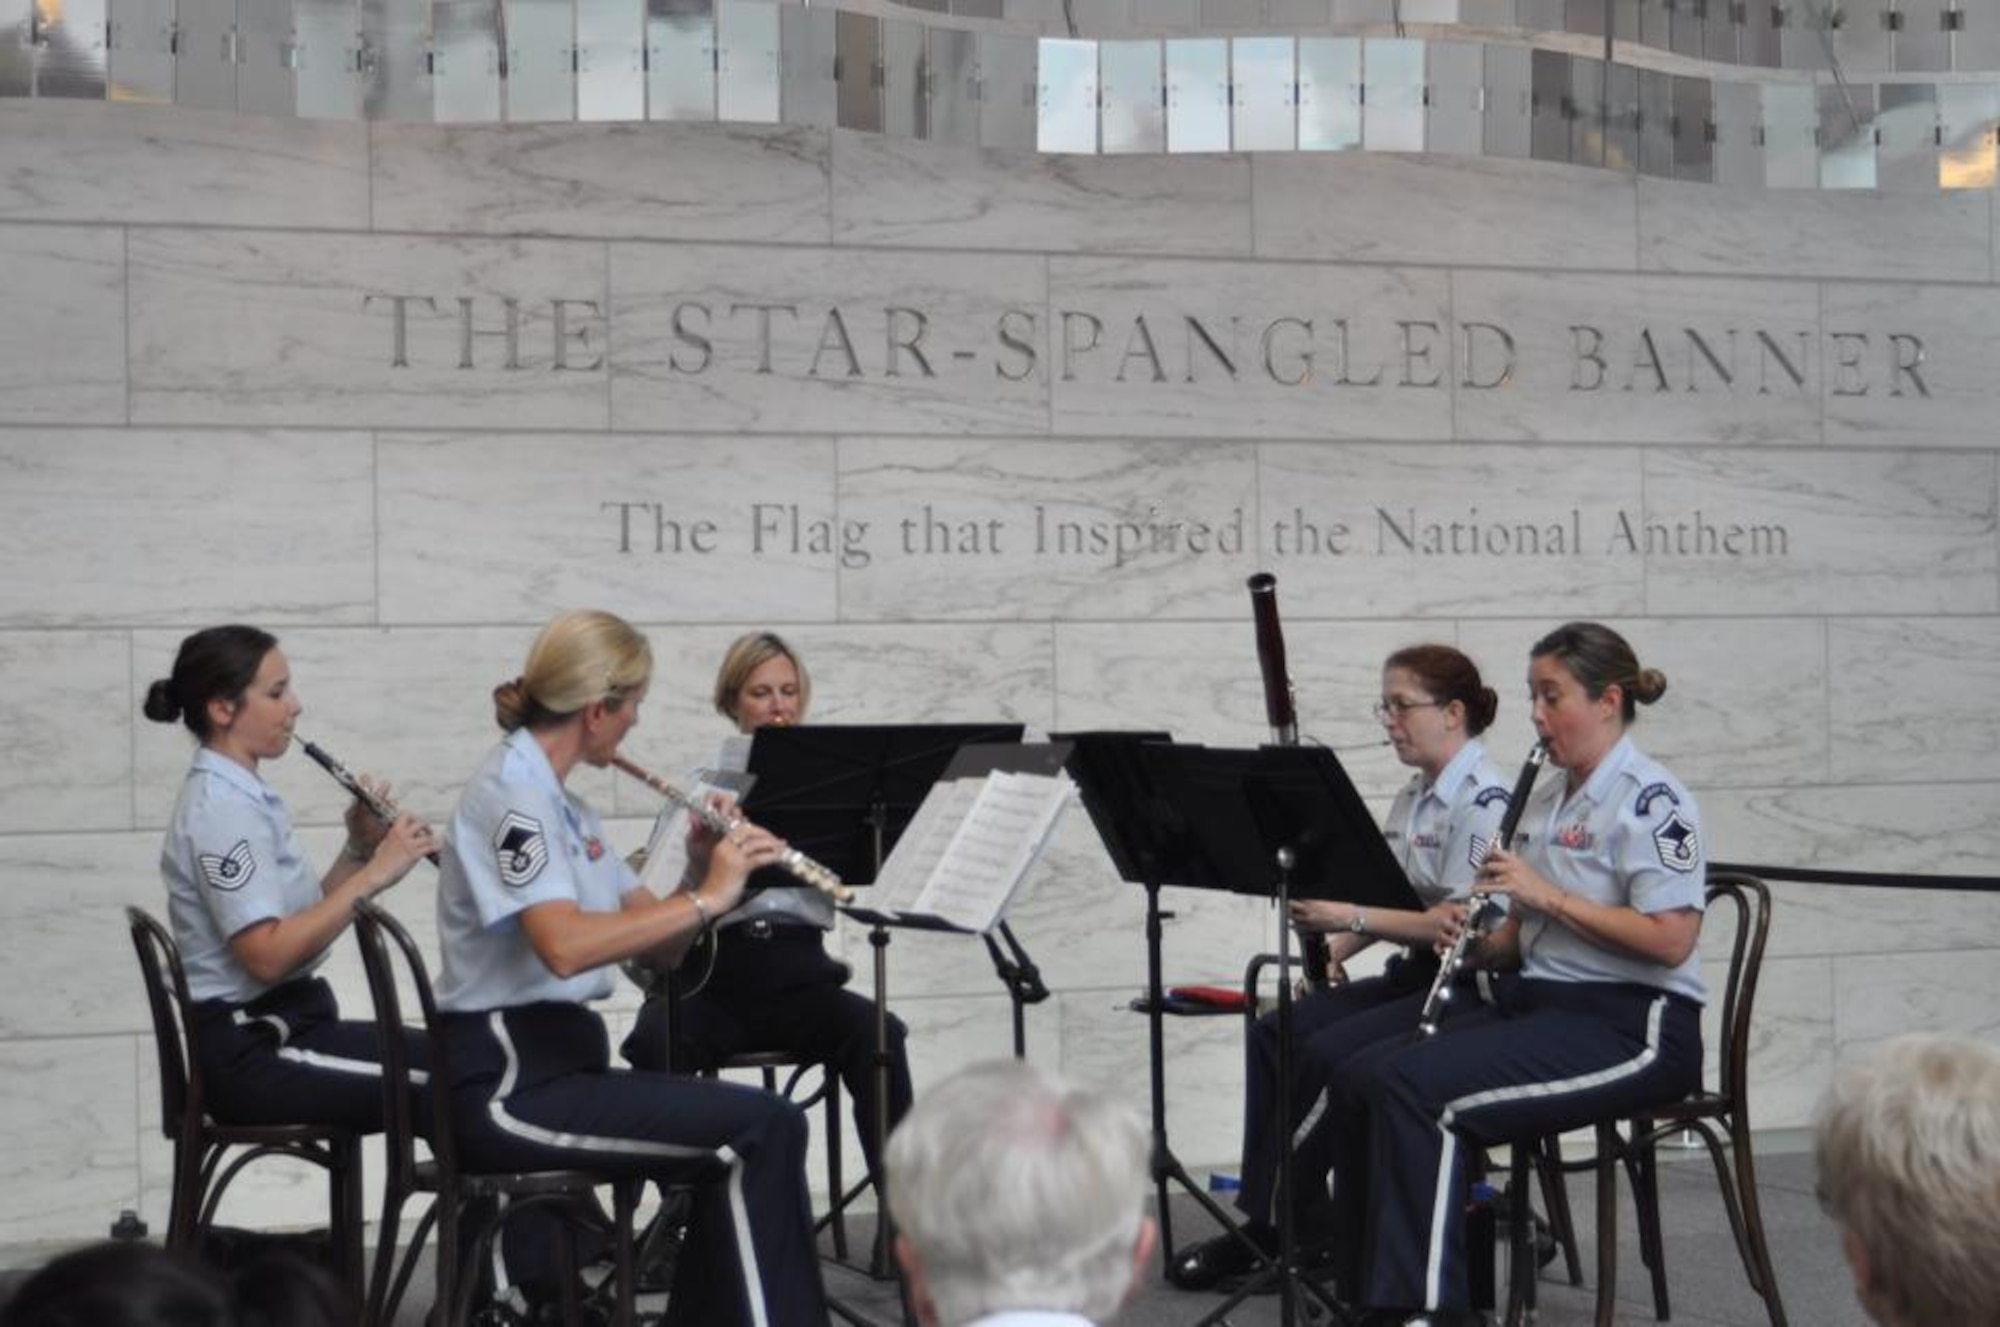 The U.S. Air Force Band Woodwind Quintet entertains visitors at the Smithsonian's National Museum of American History. March is Women's History Month, and The U.S. Air Force Band celebrates its heritage as it looks toward its future. (U.S. Air Force photo/released)